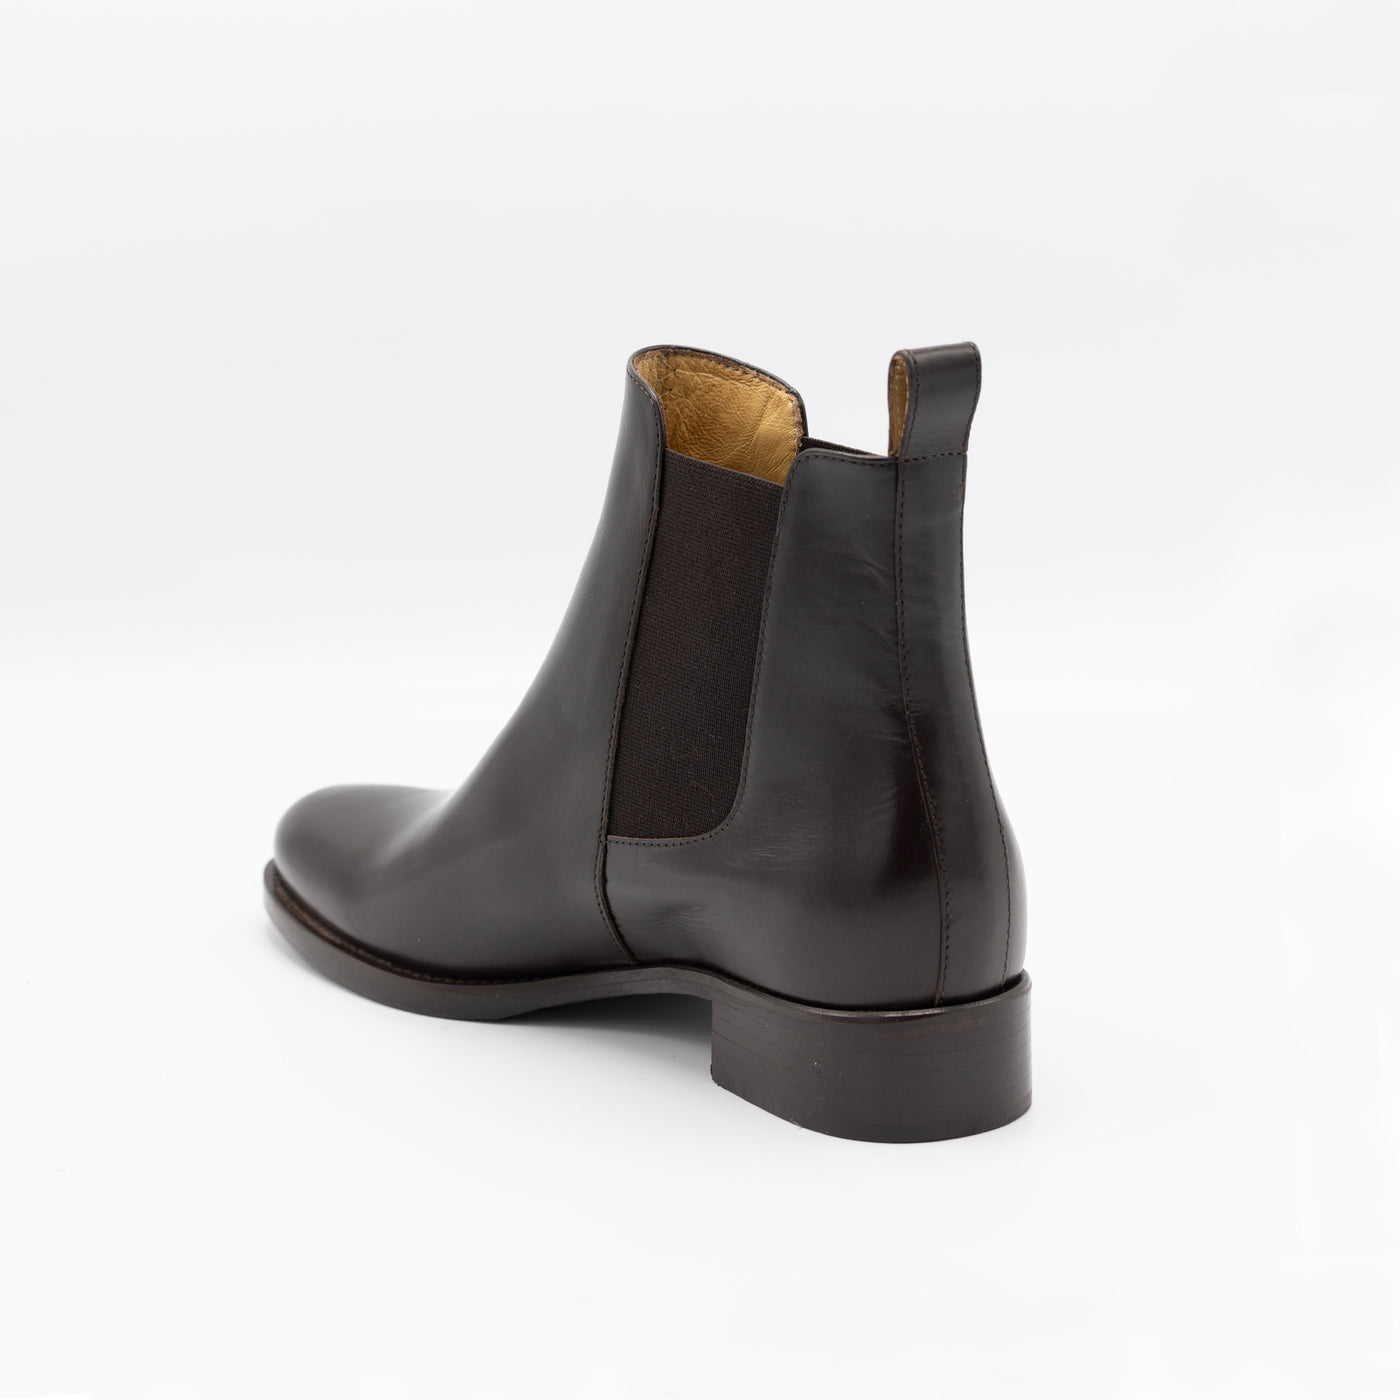 Brown leather chelsea boots with elastic panels.